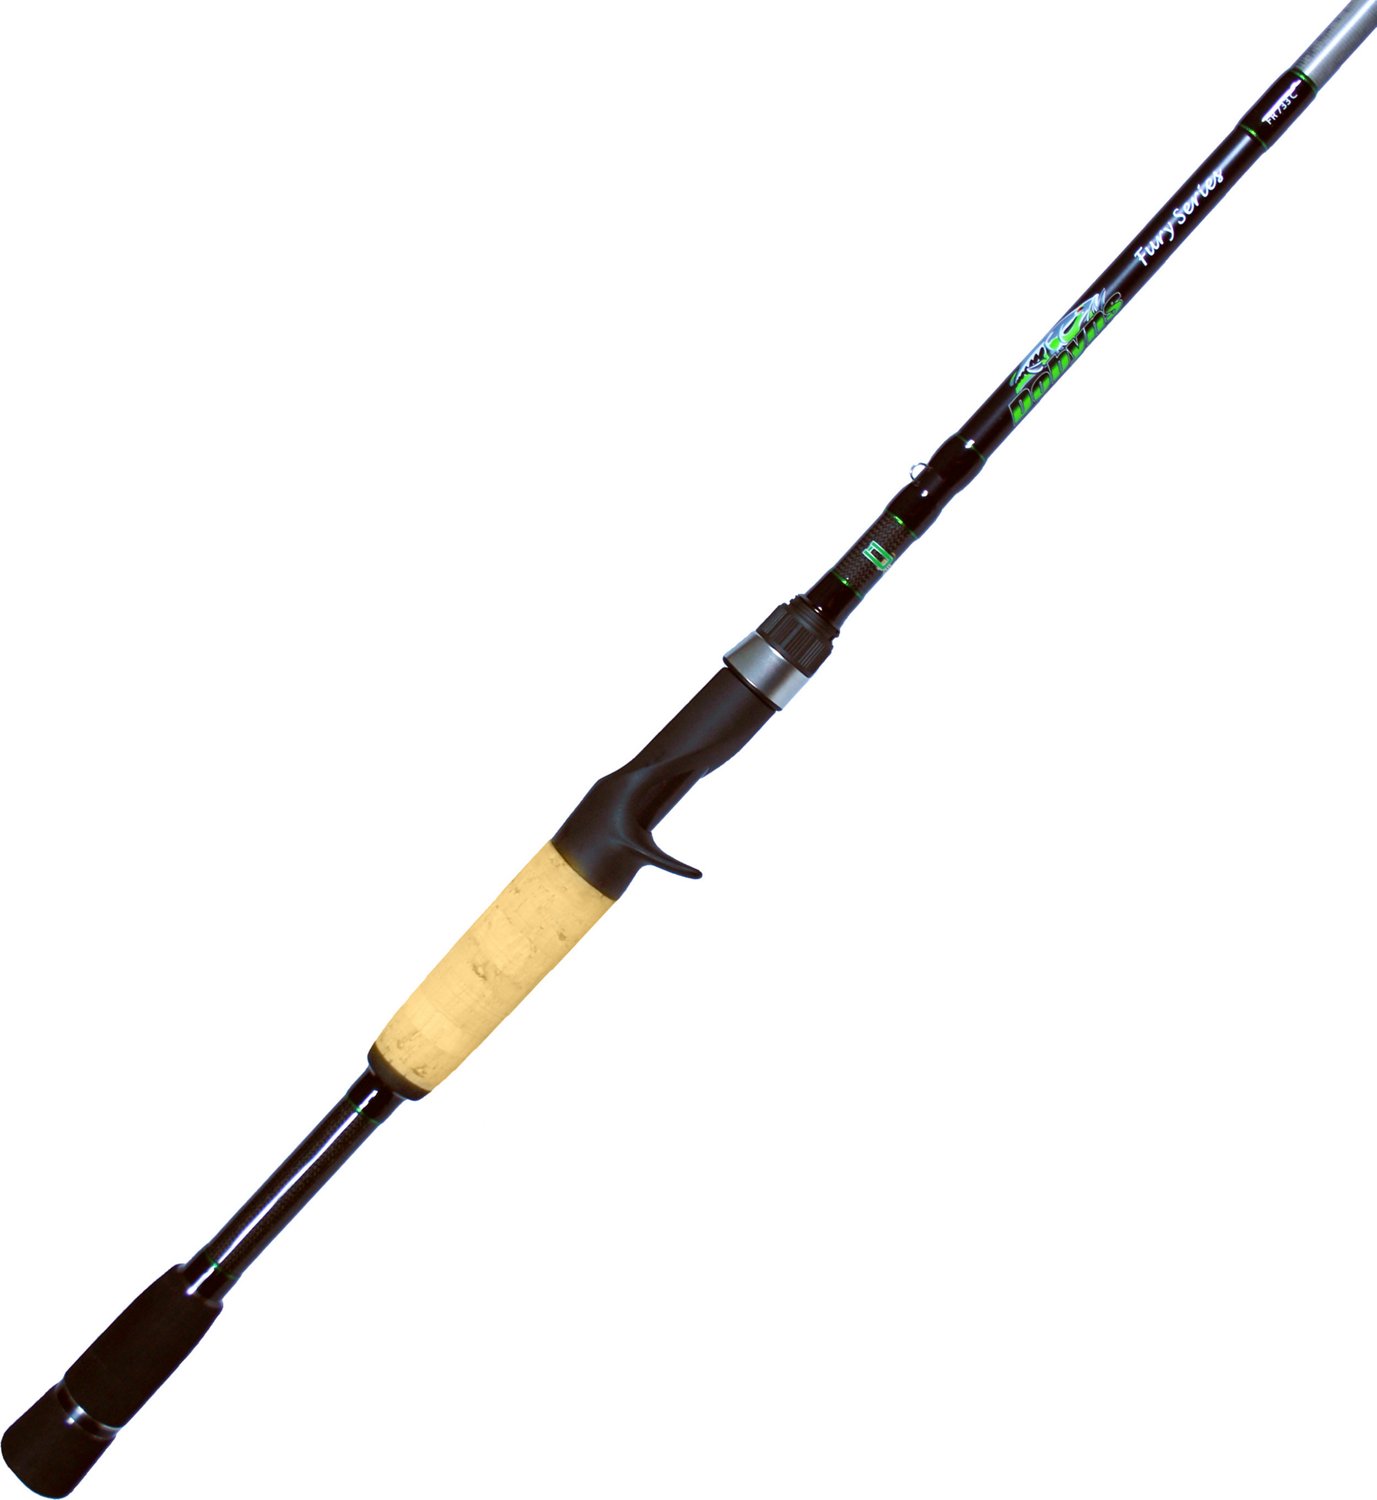 Dobyns Rods Fury Casting Rod - view number 1